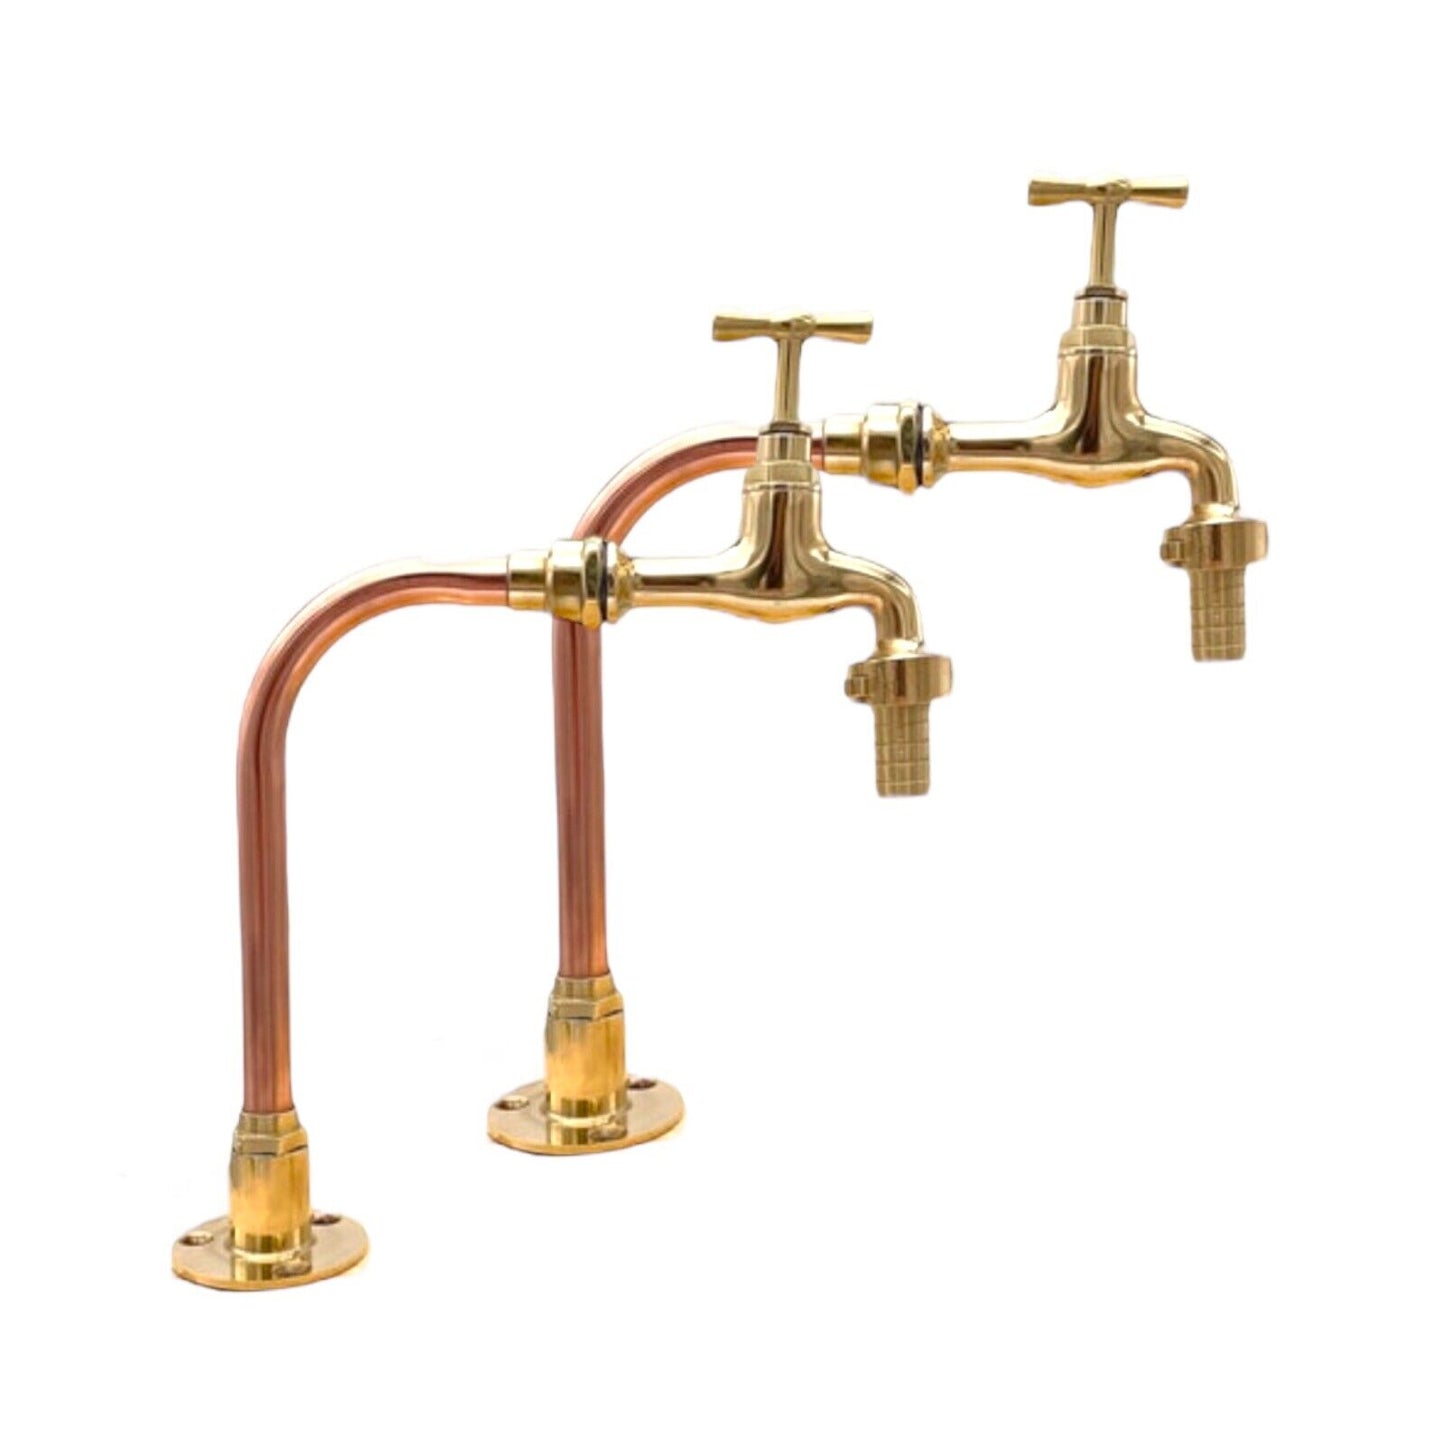 Brass and copper kitchen or bathroom taps sold by All Things French Store